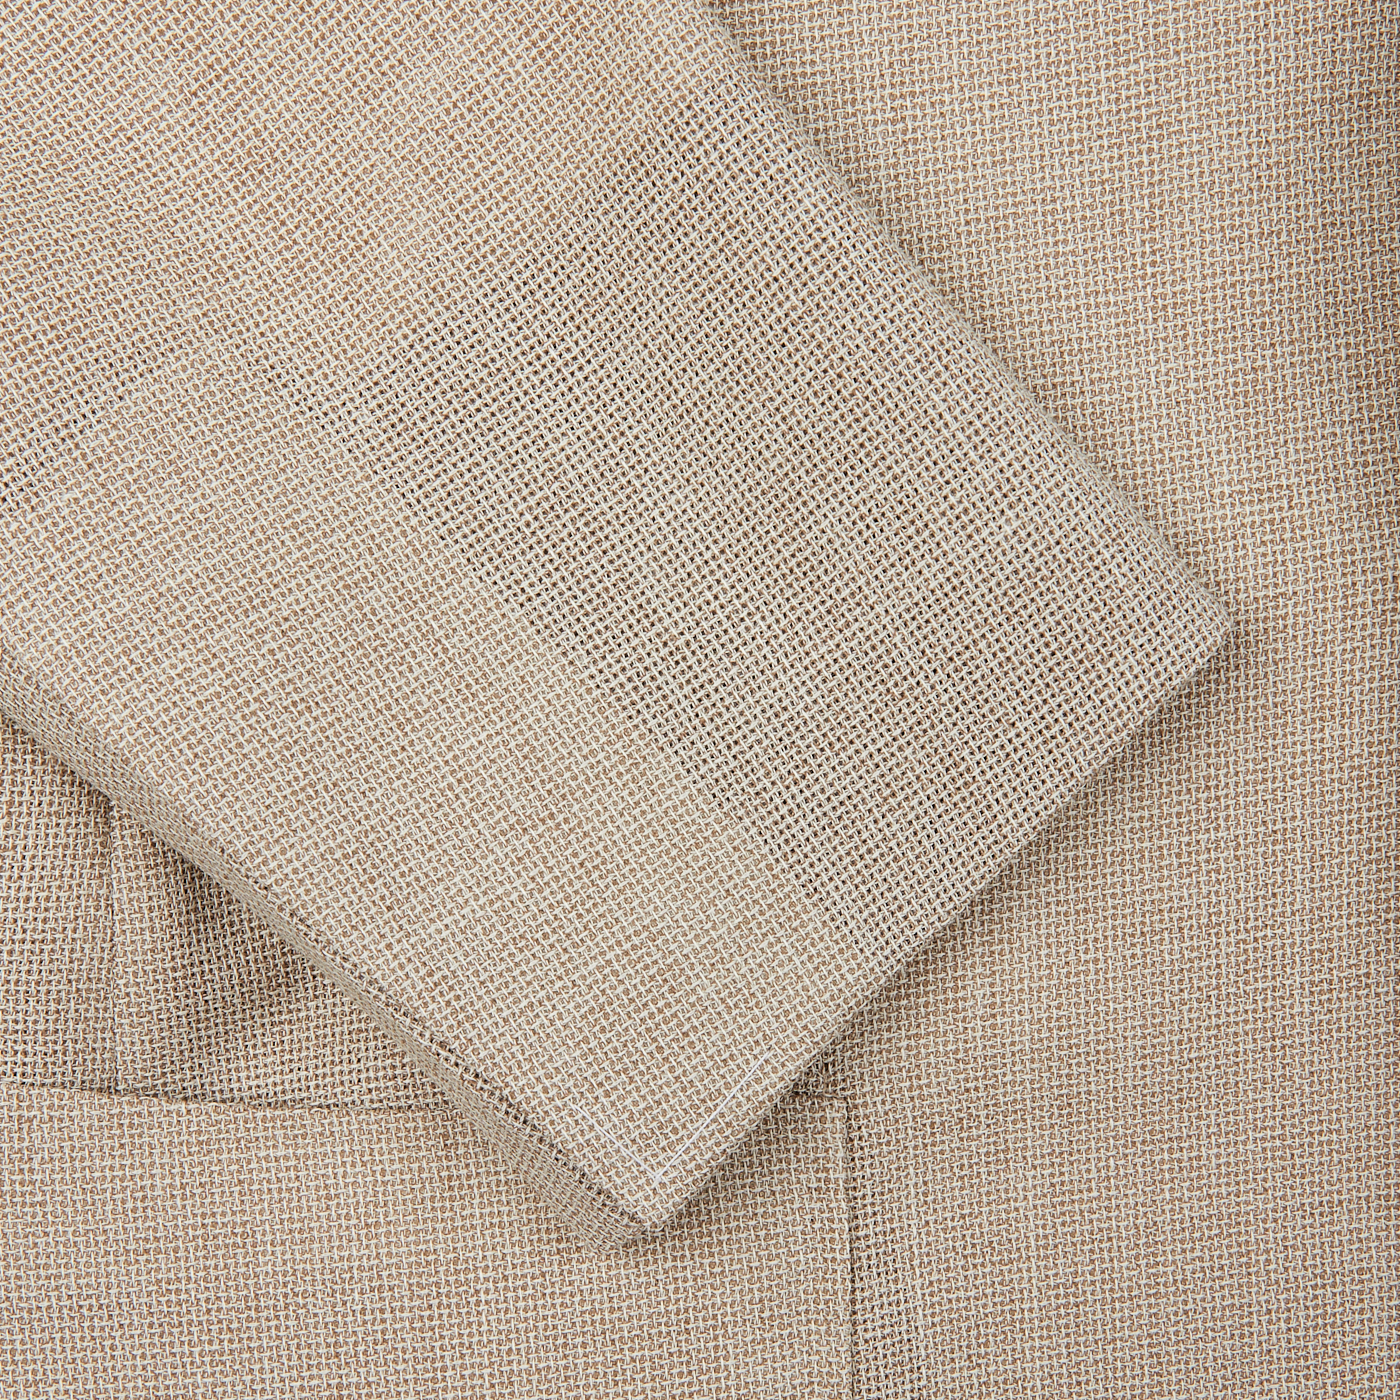 Close-up view of a light beige Ring Jacket Wool Balloon Travel Blazer texture with a folded corner, highlighting the detailed weave pattern.